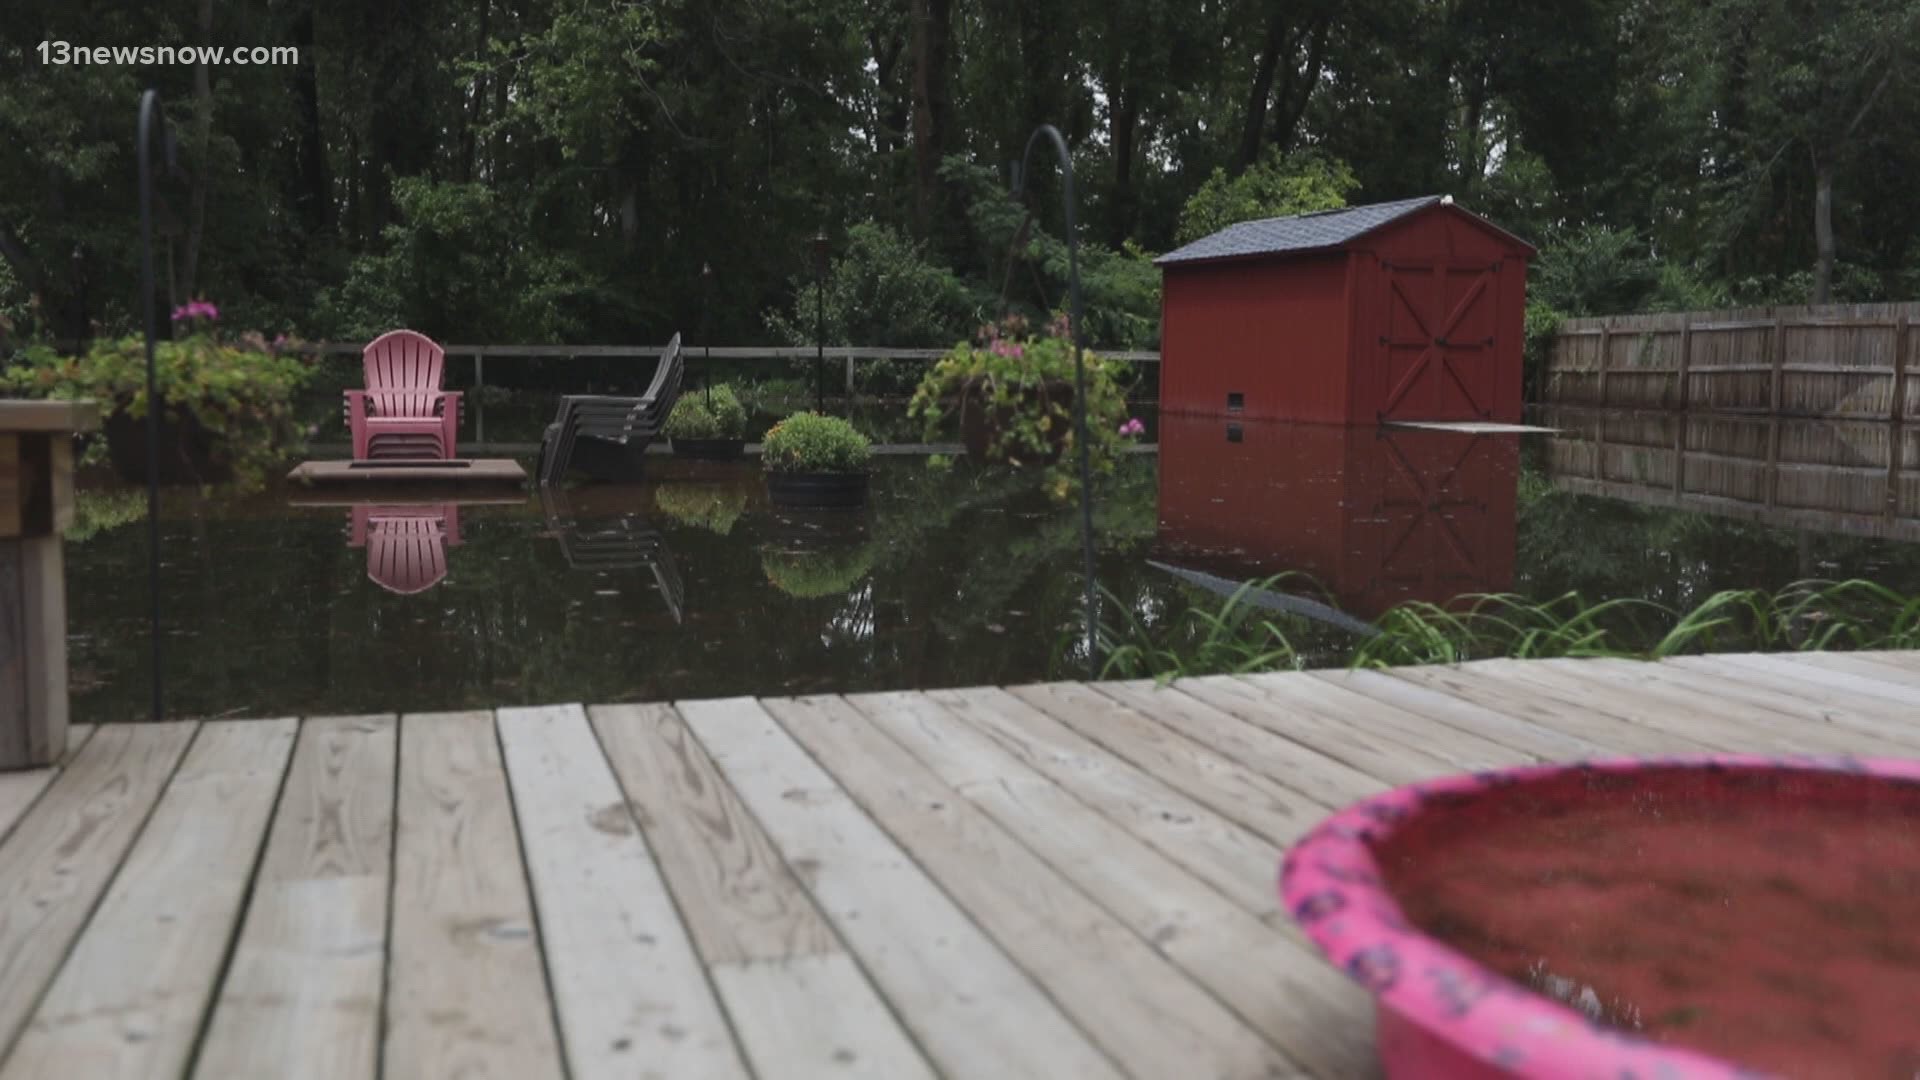 Thursday's flash flood dumped several inches of water in Virginia Beach. Roads and neighborhoods were flooded, including Red Mill, Strawbridge and Pine Meadows.